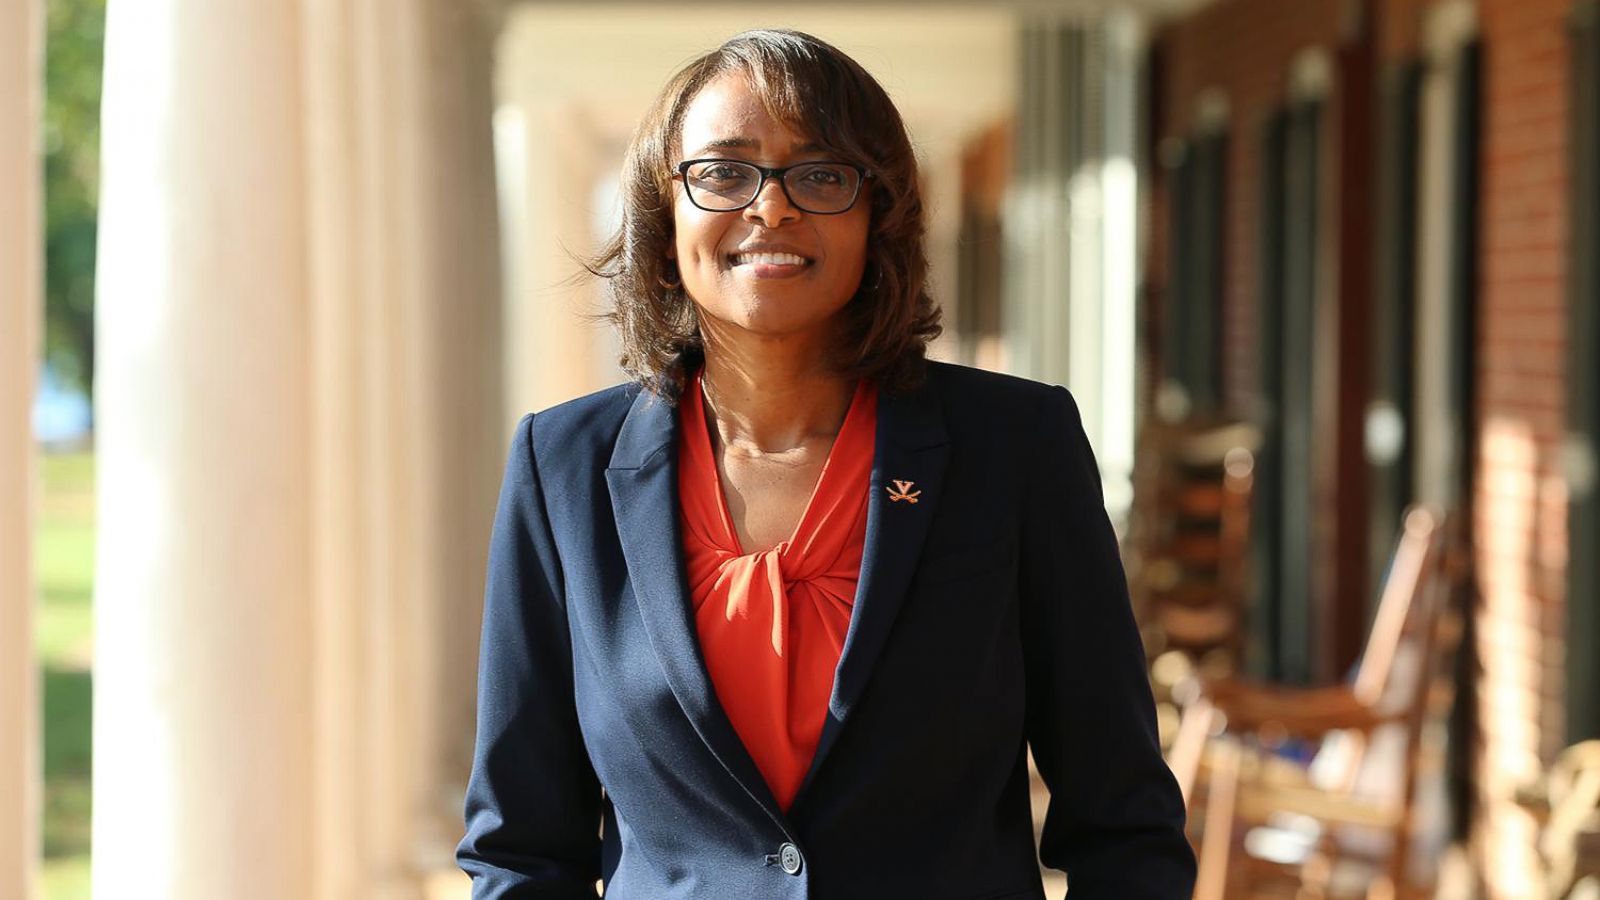 PHOTO: Carla Williams joins the University of Virginia as director of athletics she is seen here in this undated file photo.